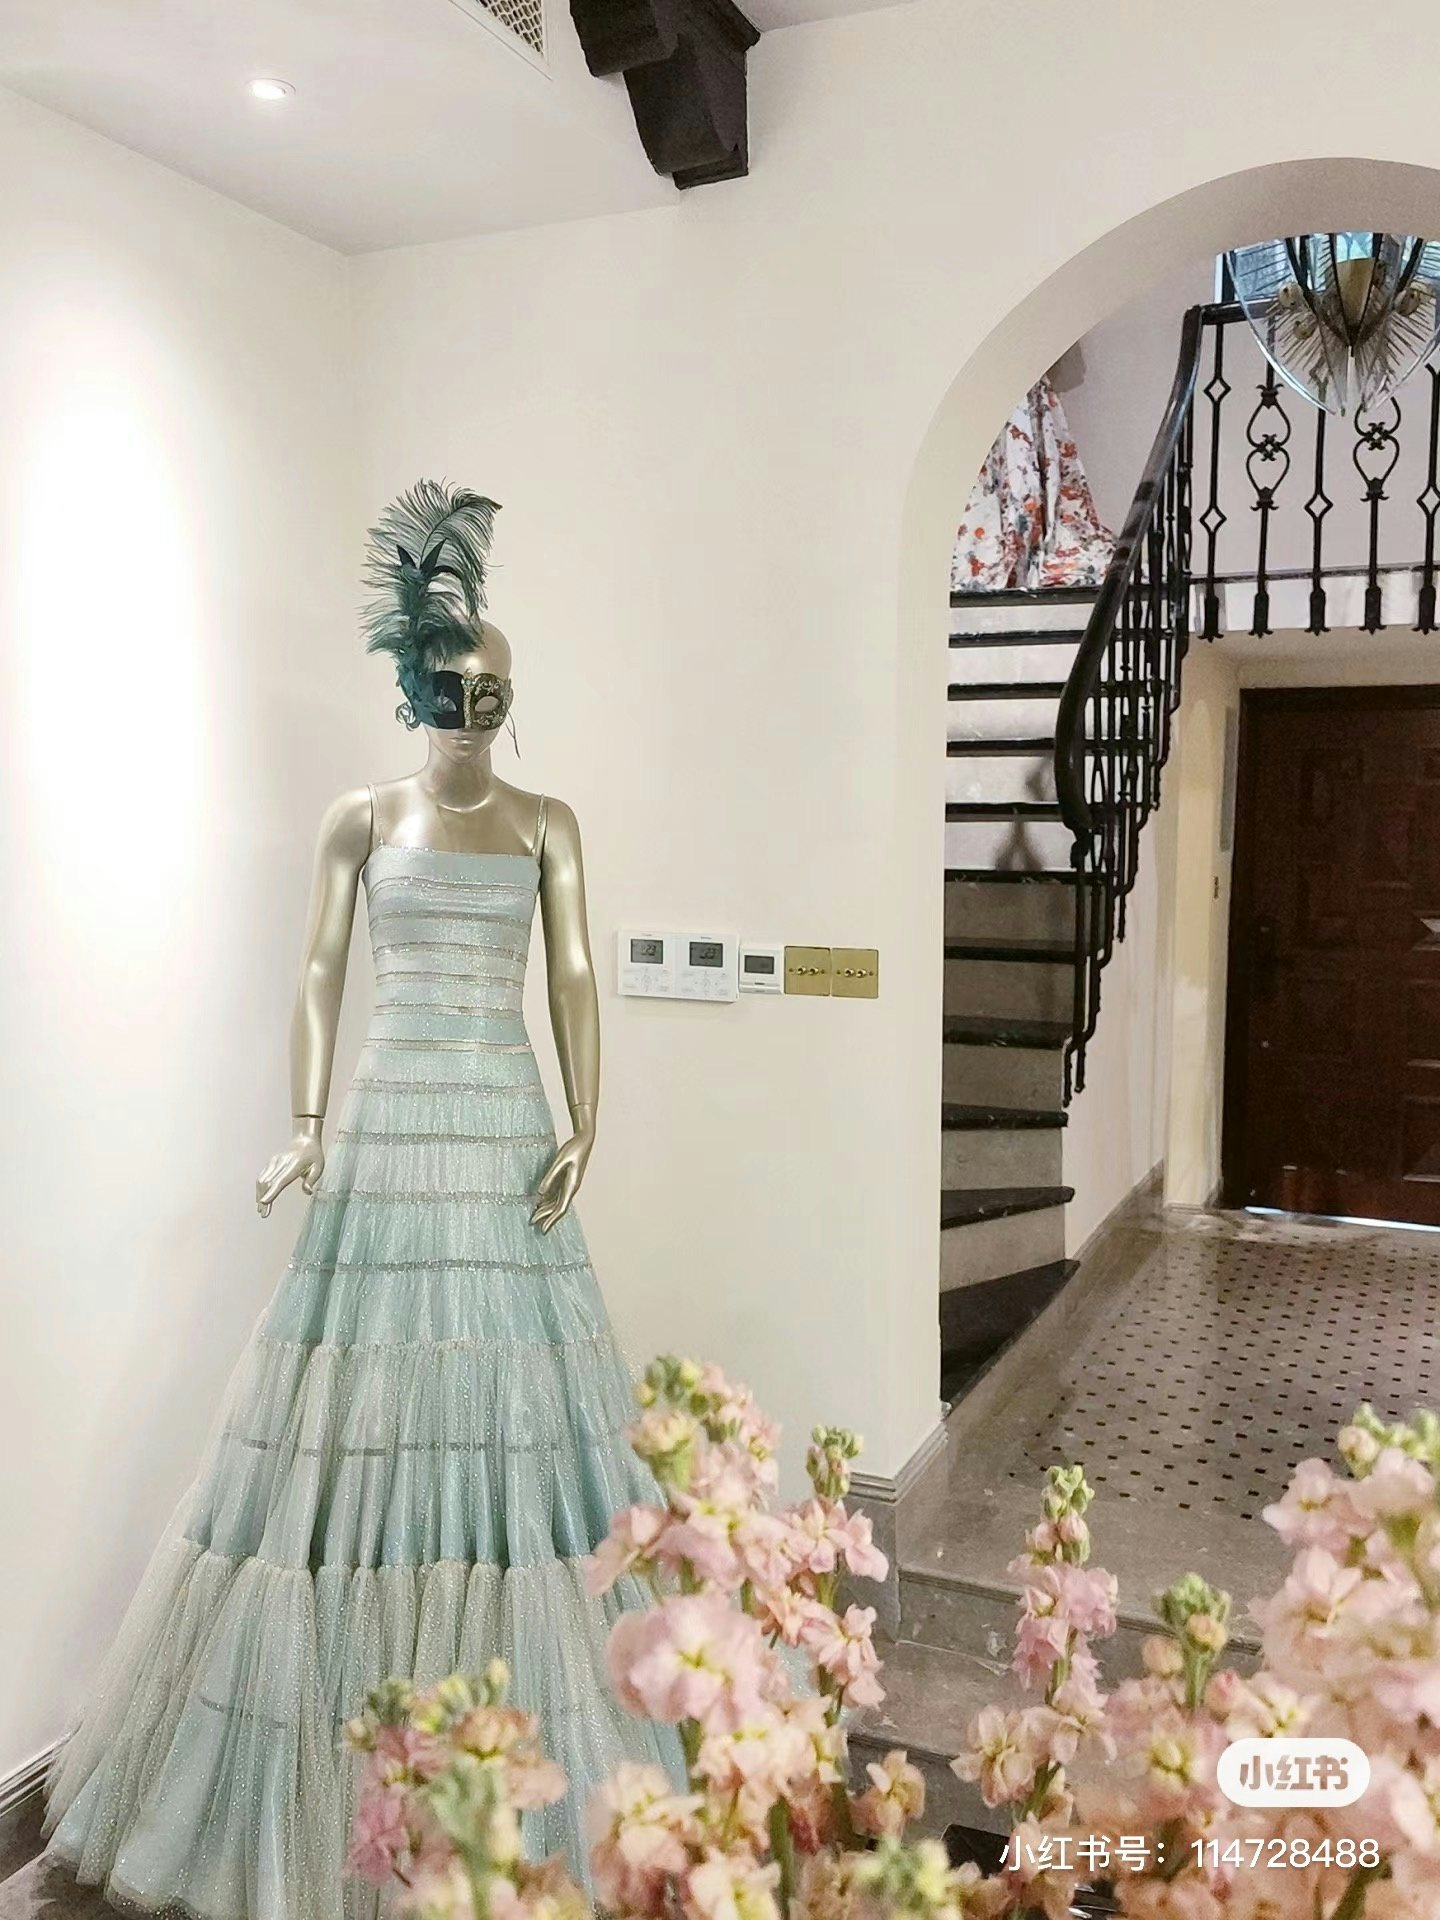 Lulu opened a space in Shanghai, Maison Lulu, to display her entire haute couture collection. Image: Xiaohongshu